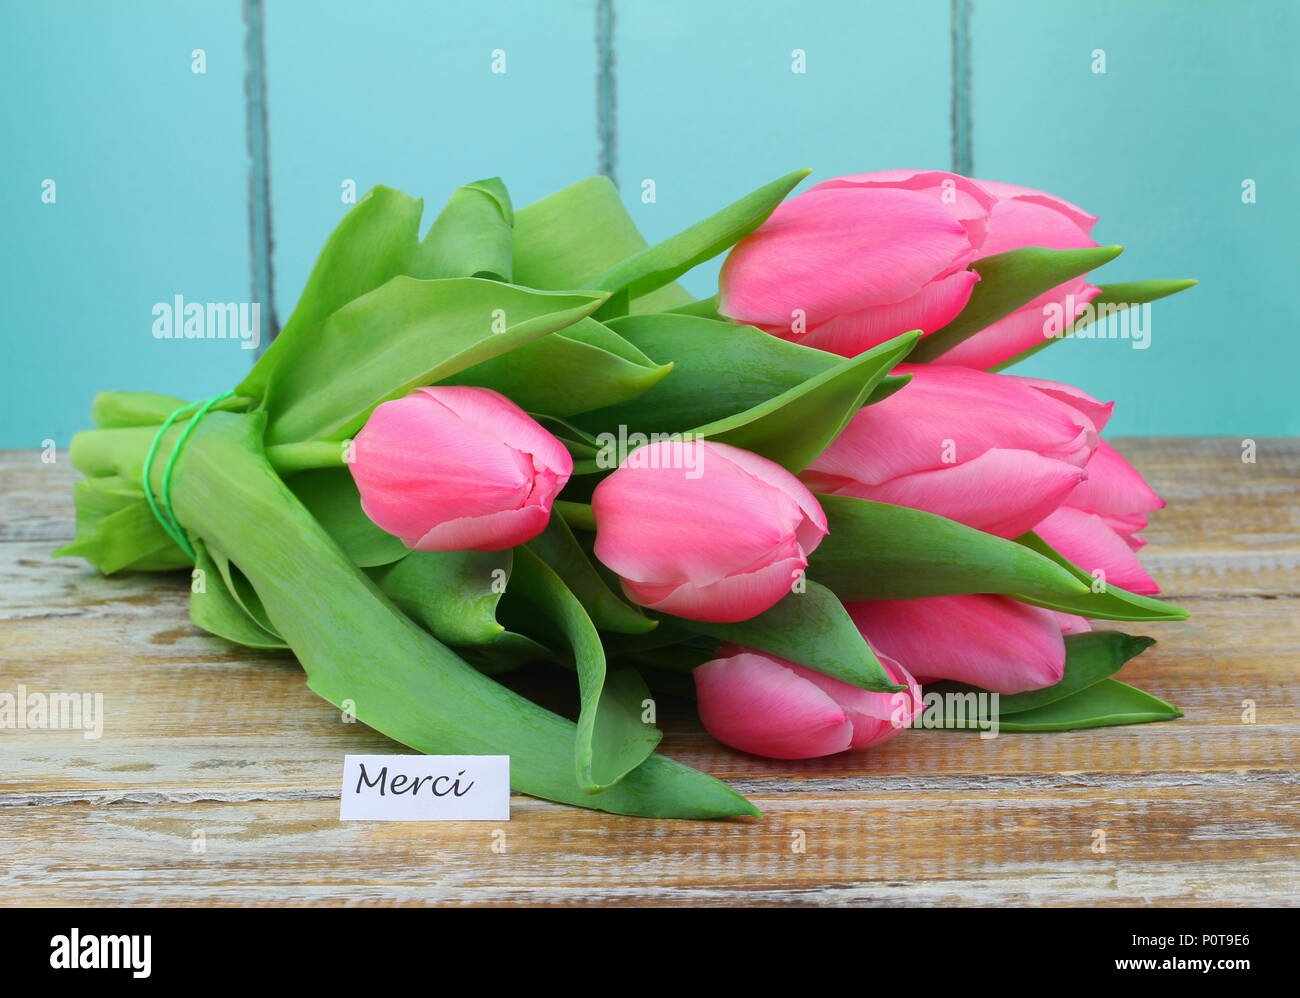 Merci (thank you in French) card with pink tulip bouquet on rustic wooden surface Stock Photo